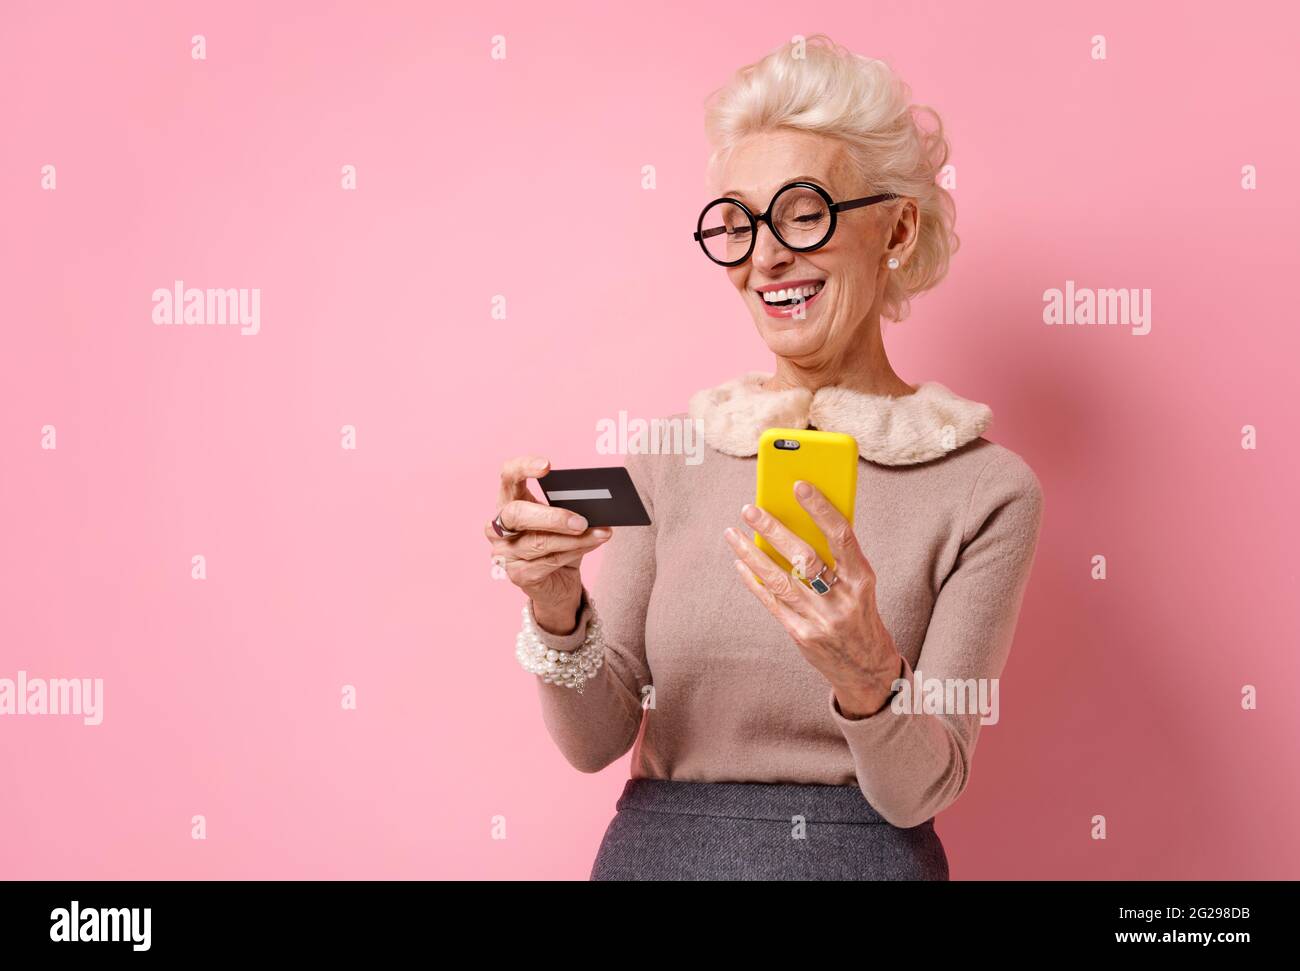 Grandmother makes a payment, using a credit card and smartphone. Photo of kind elderly woman on pink background. Stock Photo